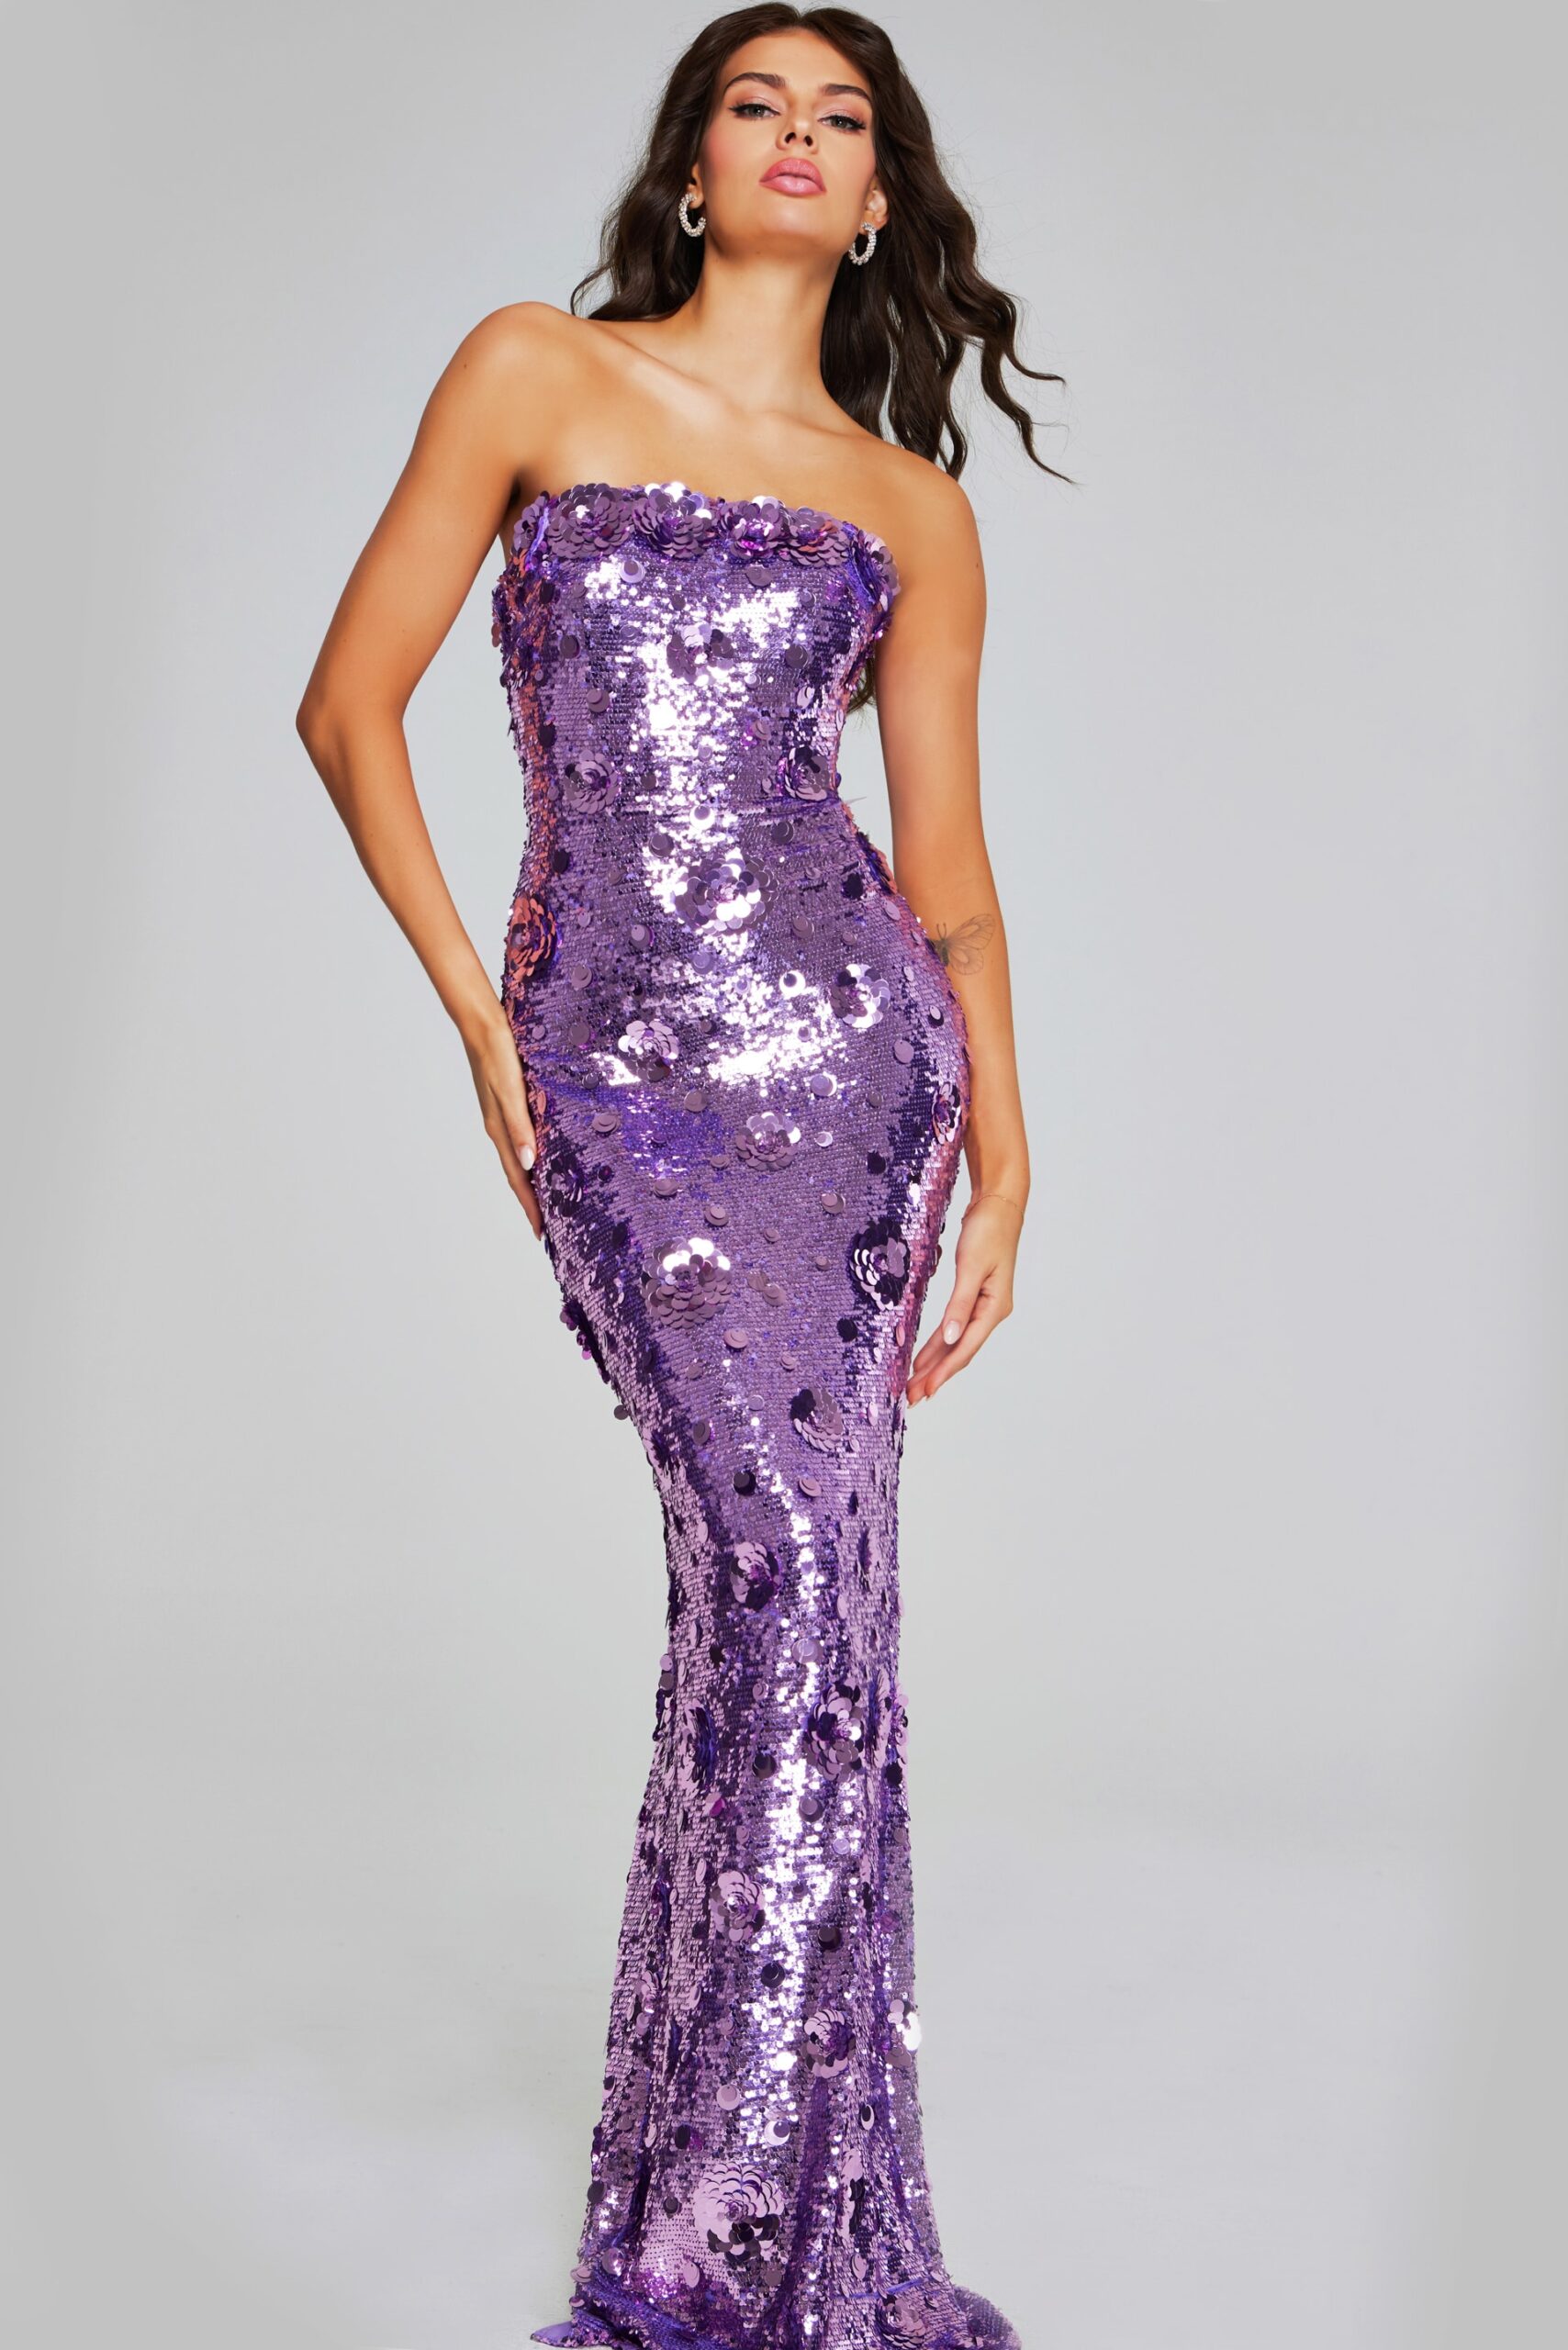 Model wearing Dazzling Lilac Sequin Strapless Gown with Floral Accents 42154